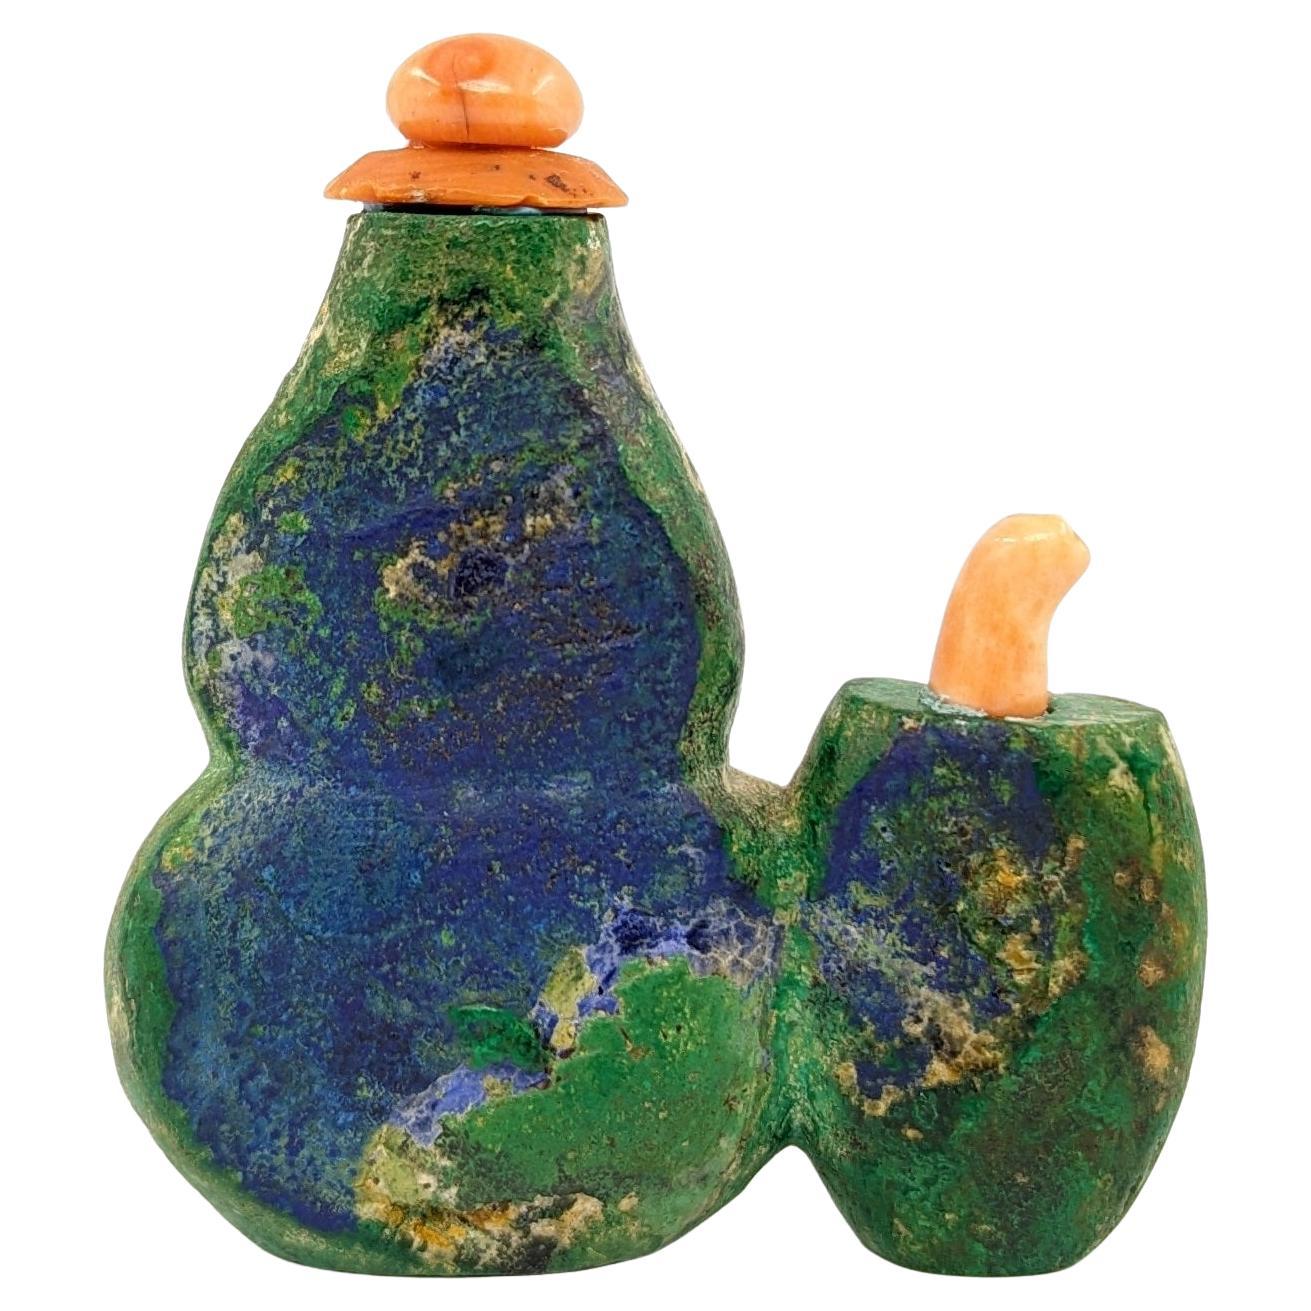 Rare Antique Chinese Azurite Malachite Double Snuff Bottle 19c Qing Dynasty For Sale 1